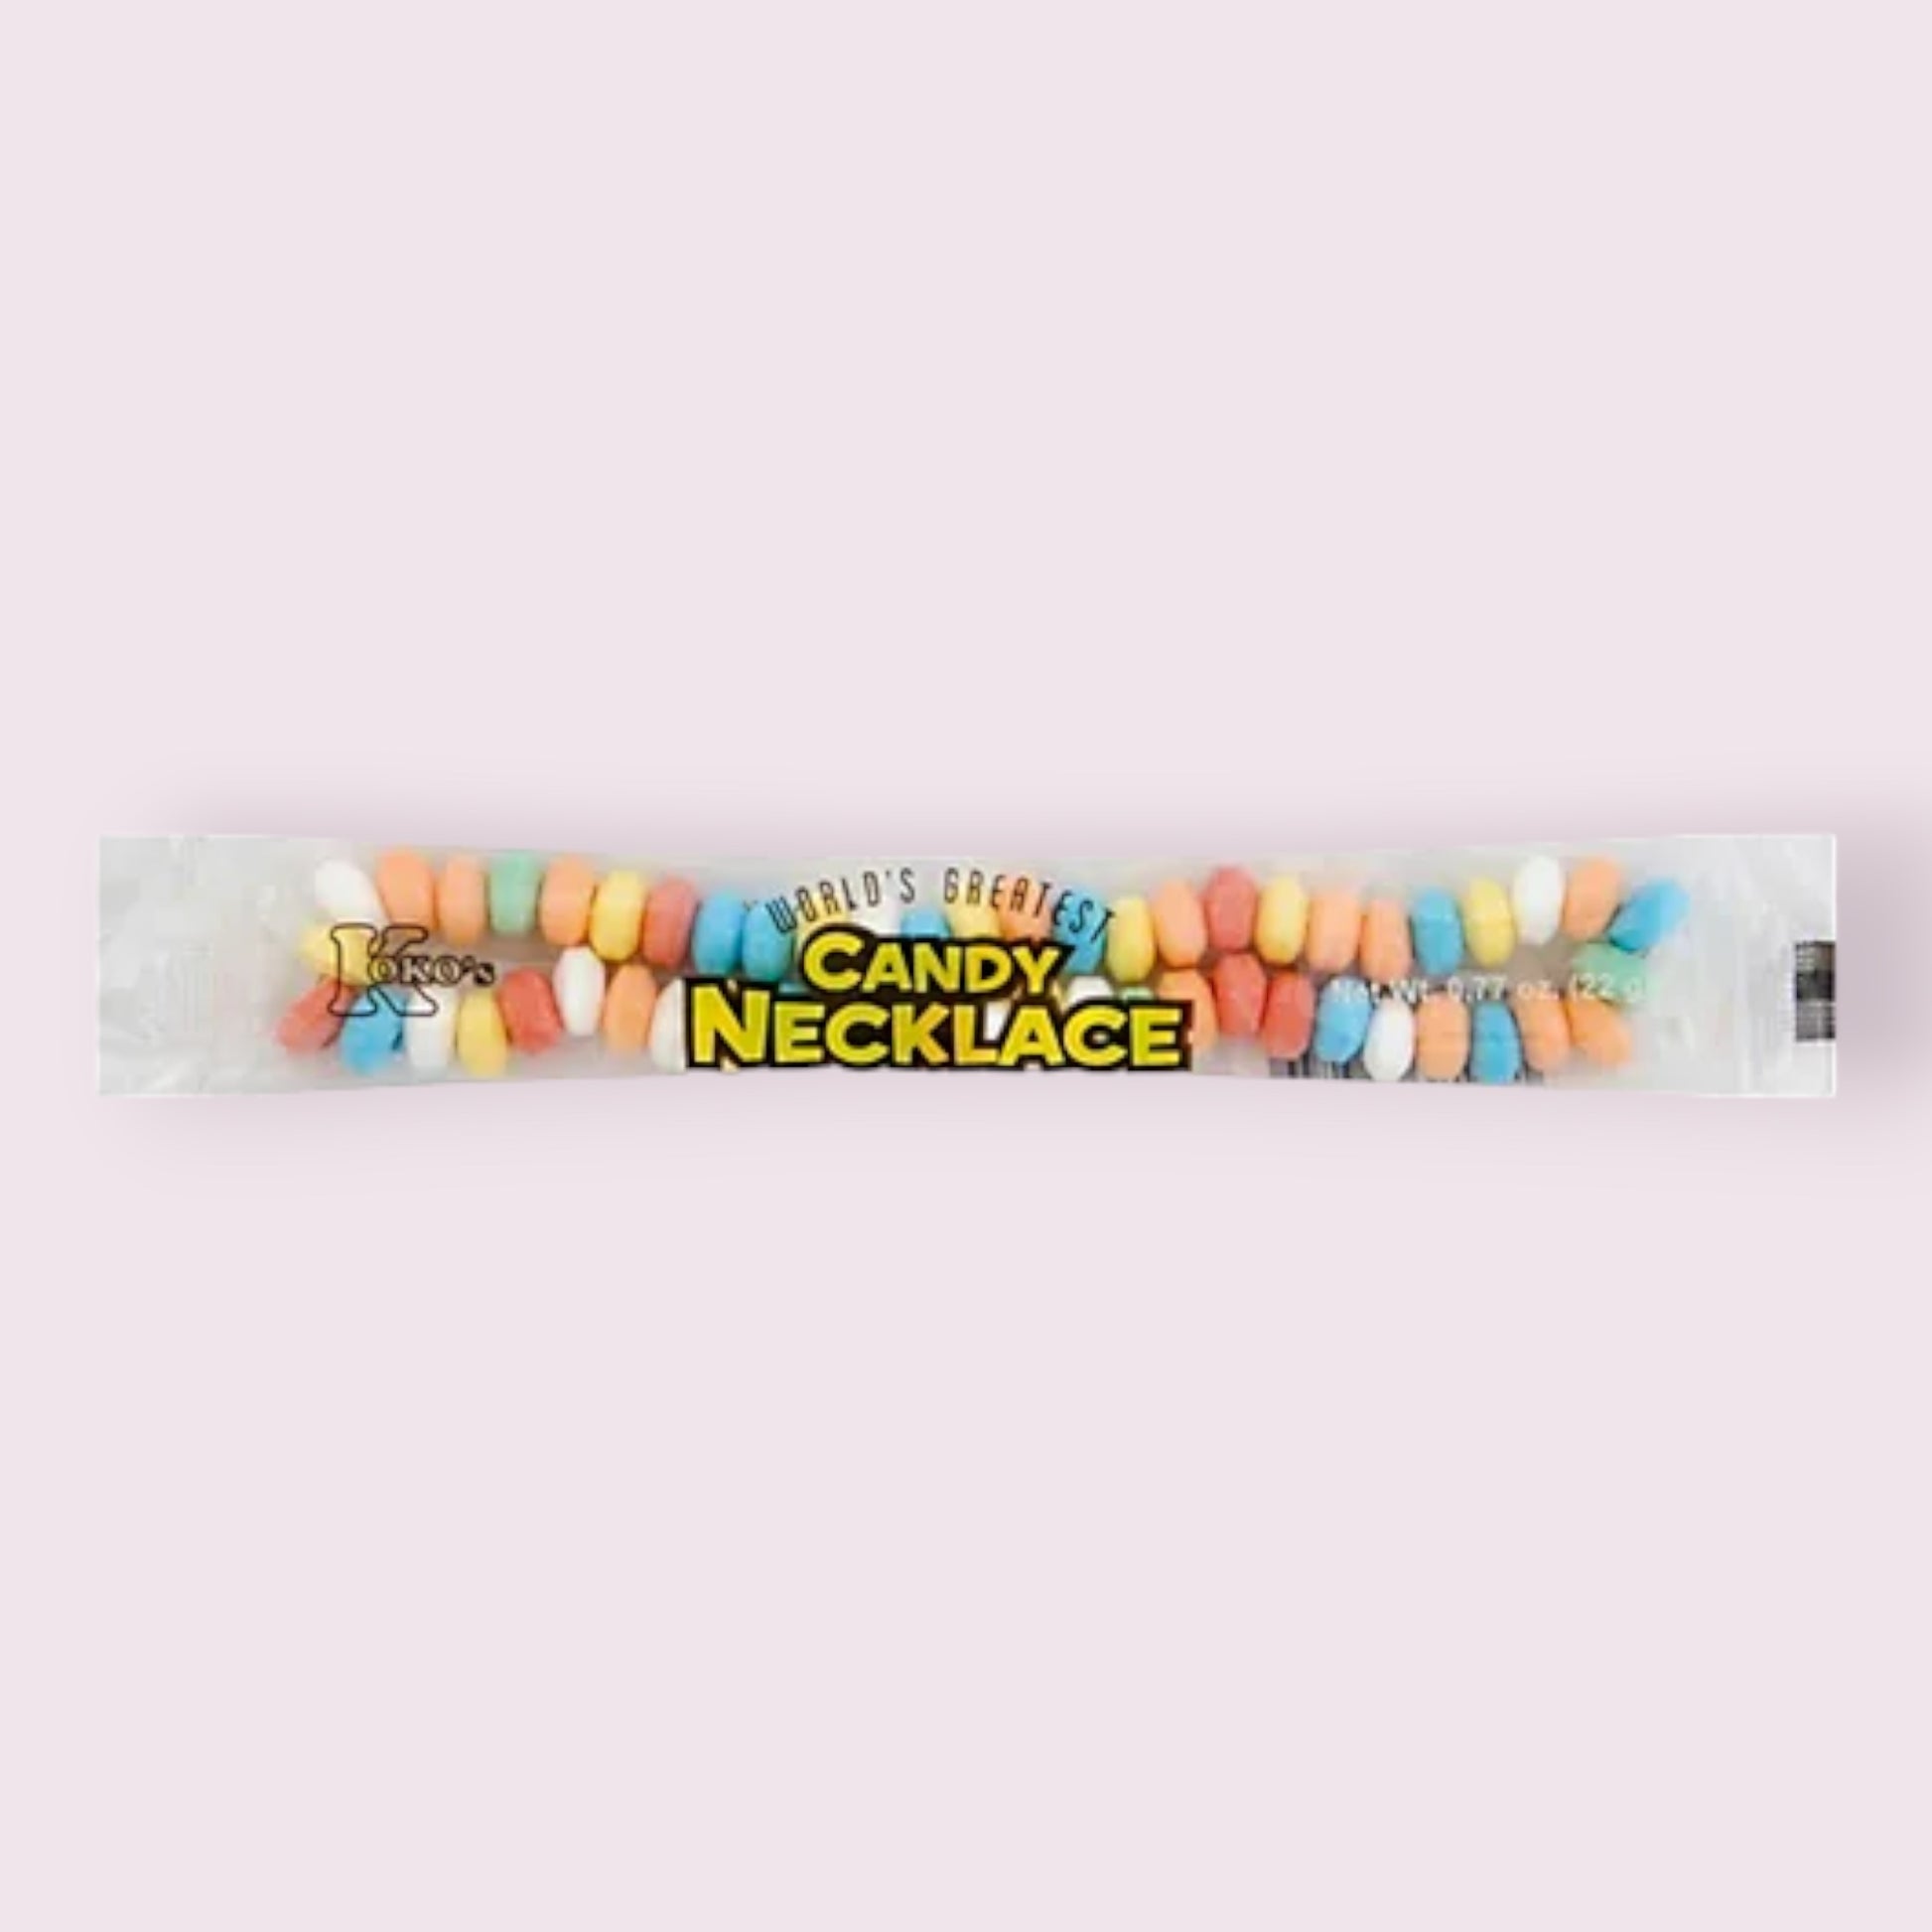 Worlds Greatest Candy Necklace  Pixie Candy Shoppe   